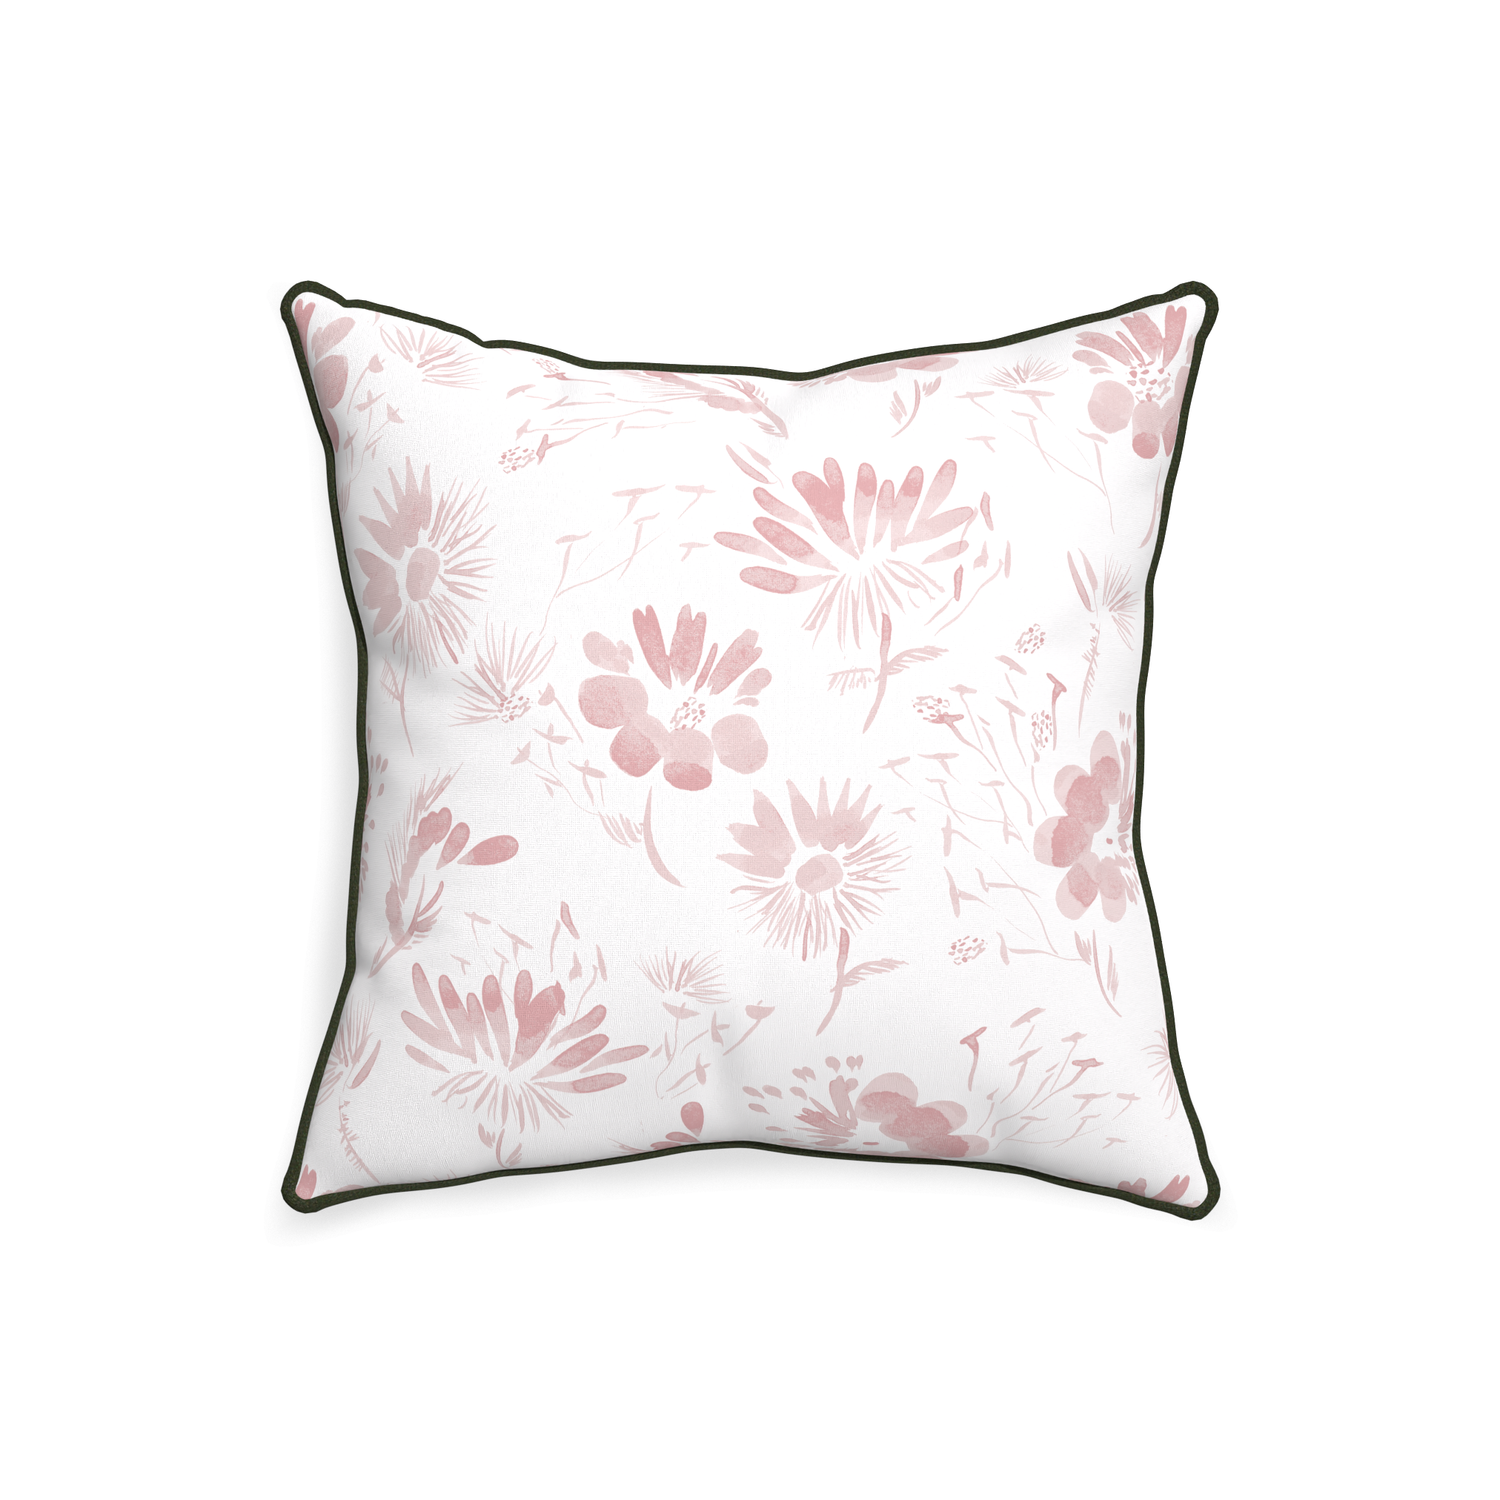 20-square blake custom pink floralpillow with f piping on white background